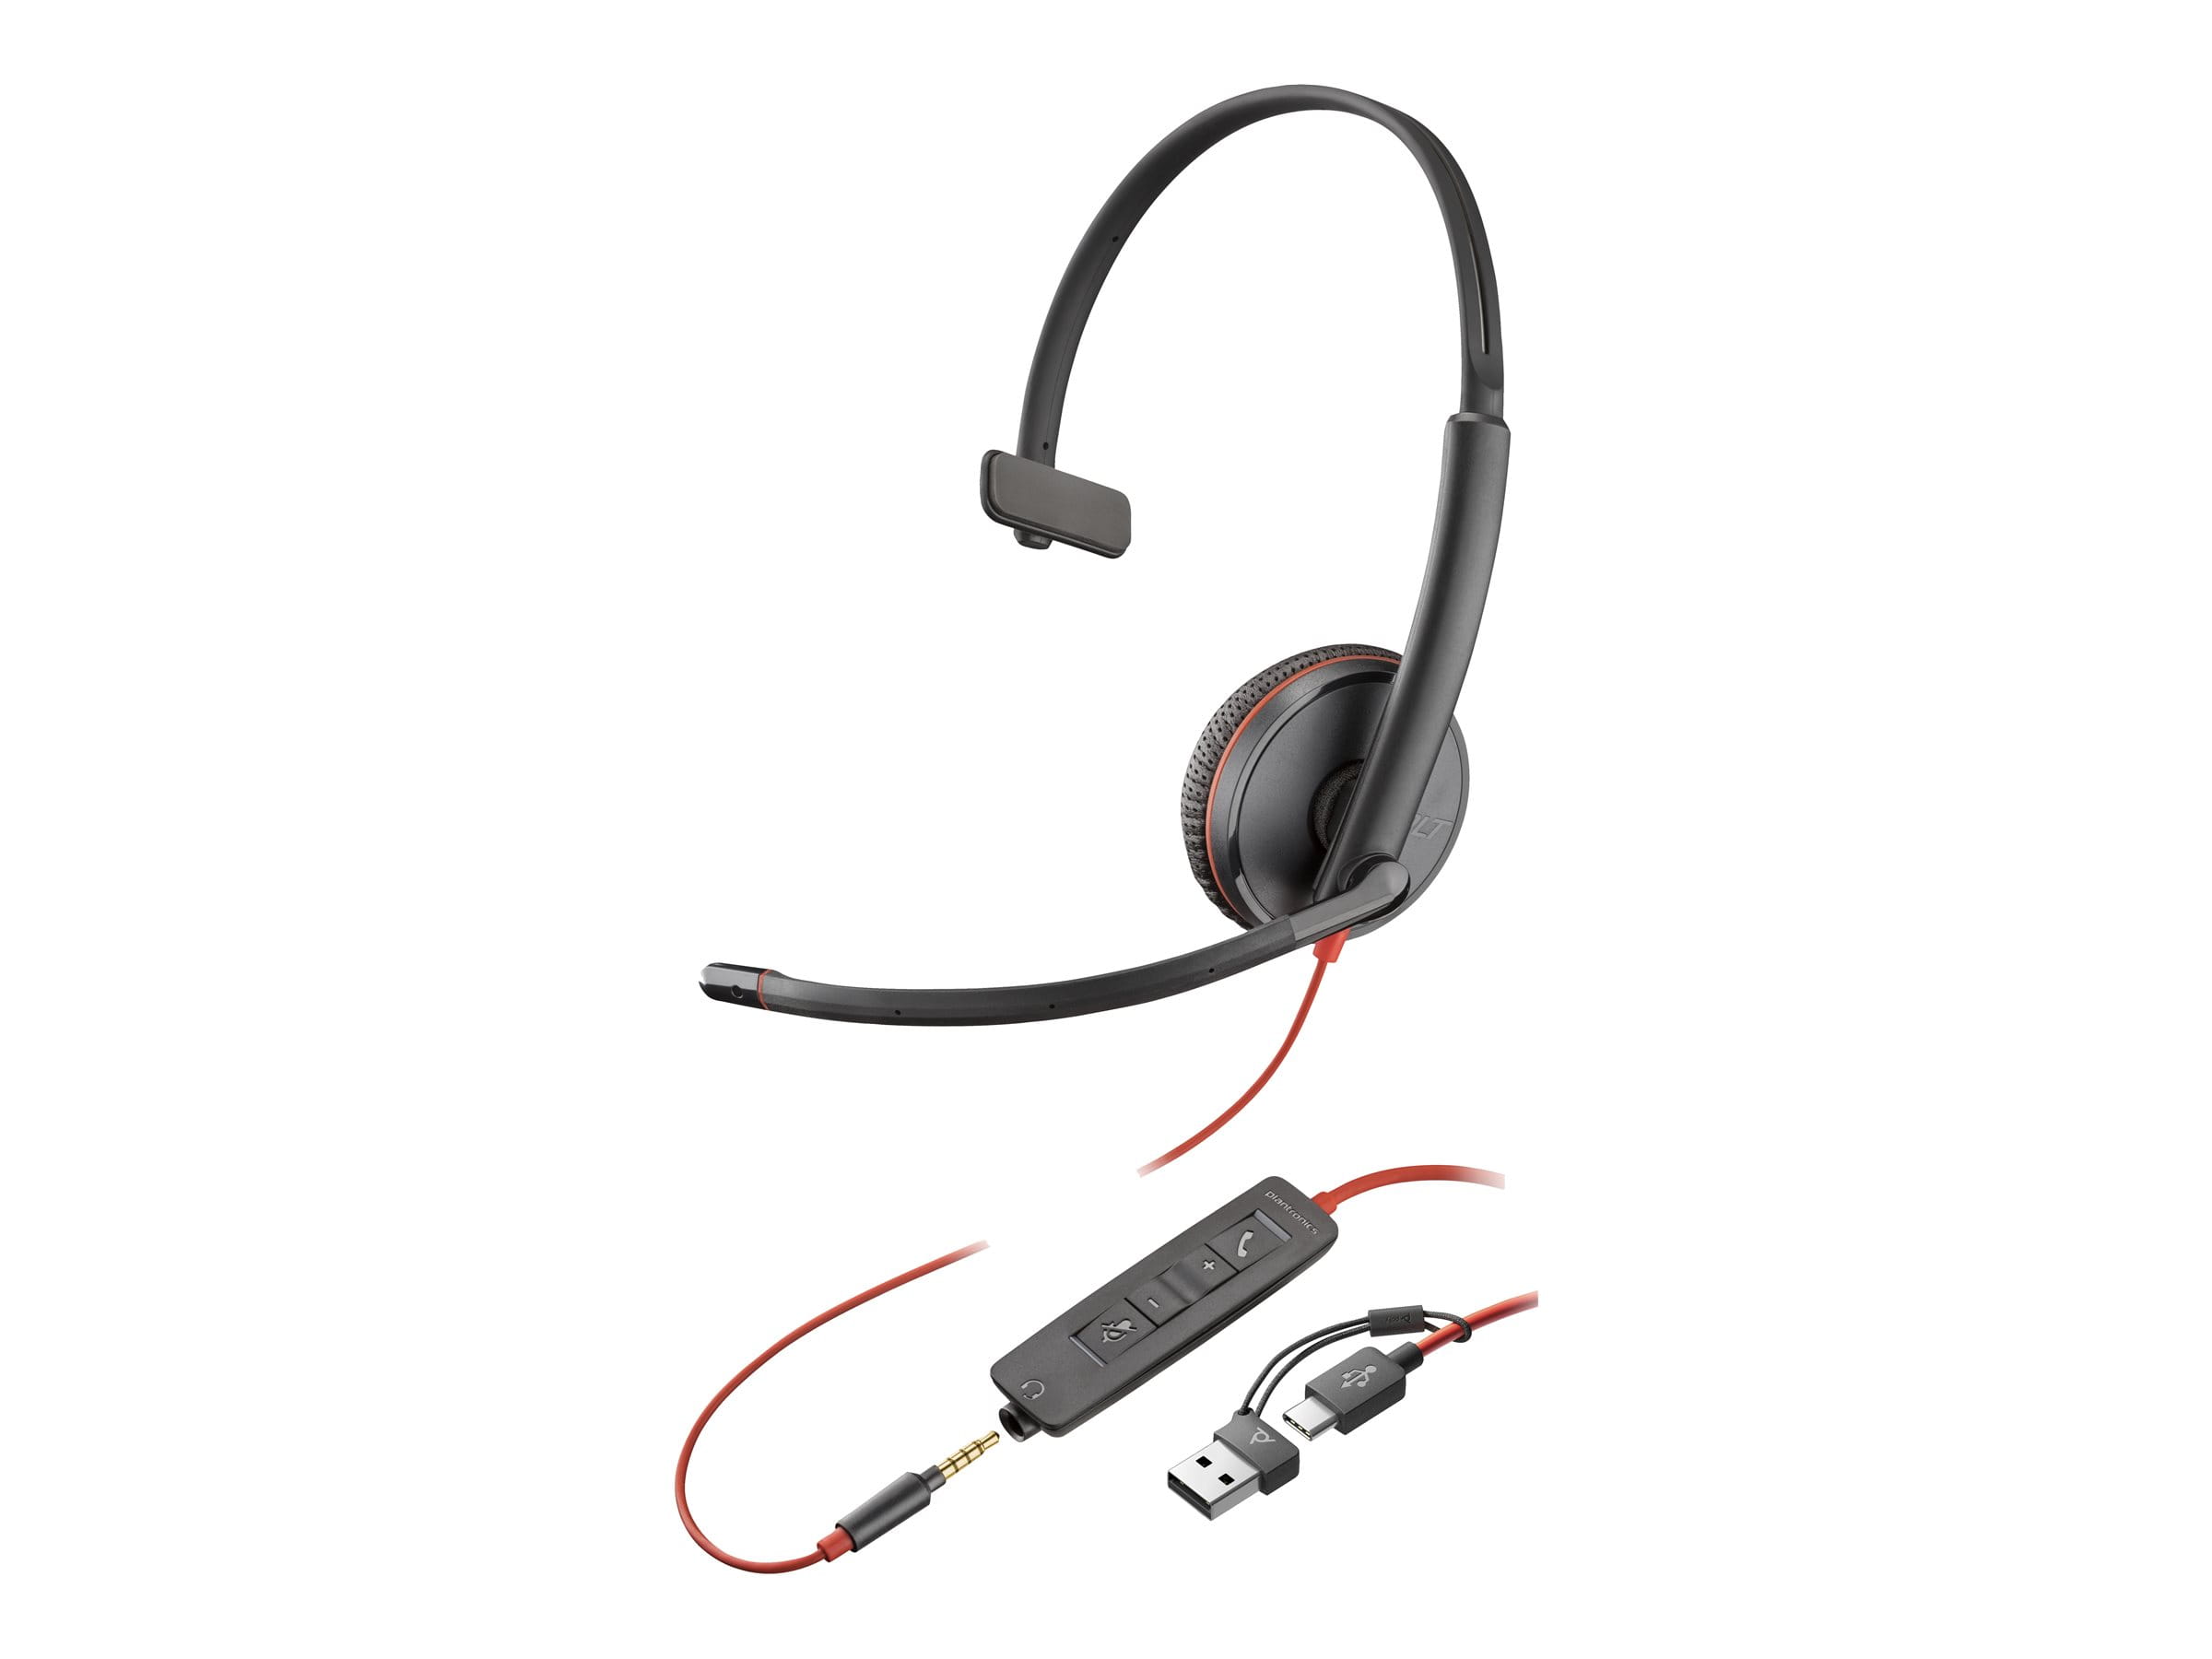 HP Poly Blackwire 3215 - Blackwire 3200 Series - Headset